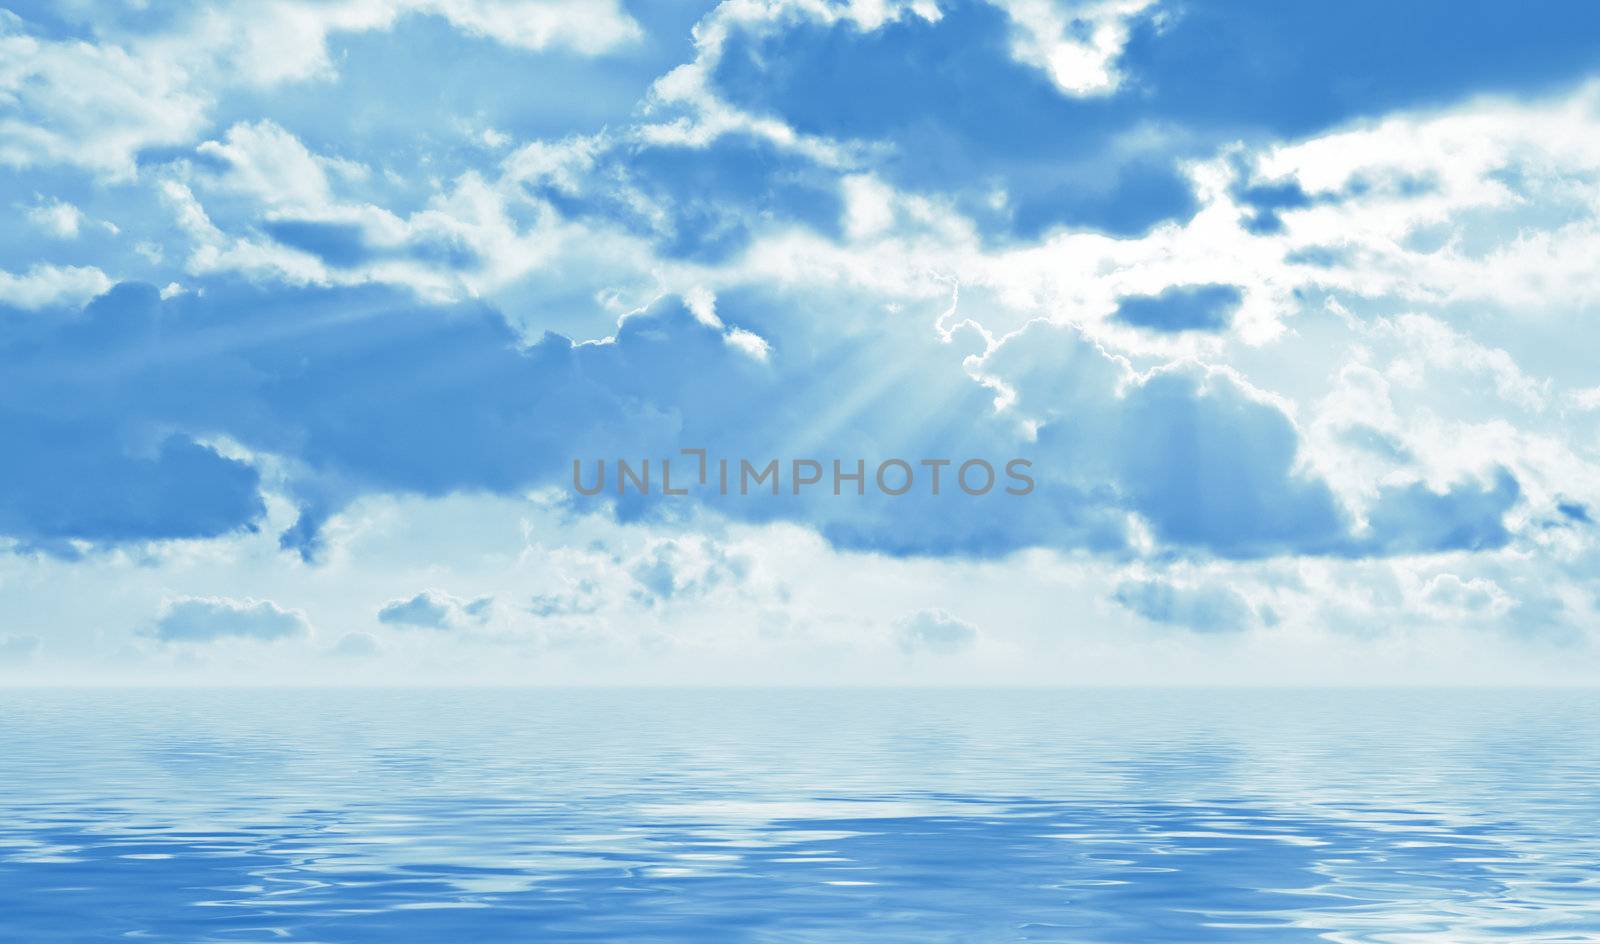 A photography of a cloudy blue sky